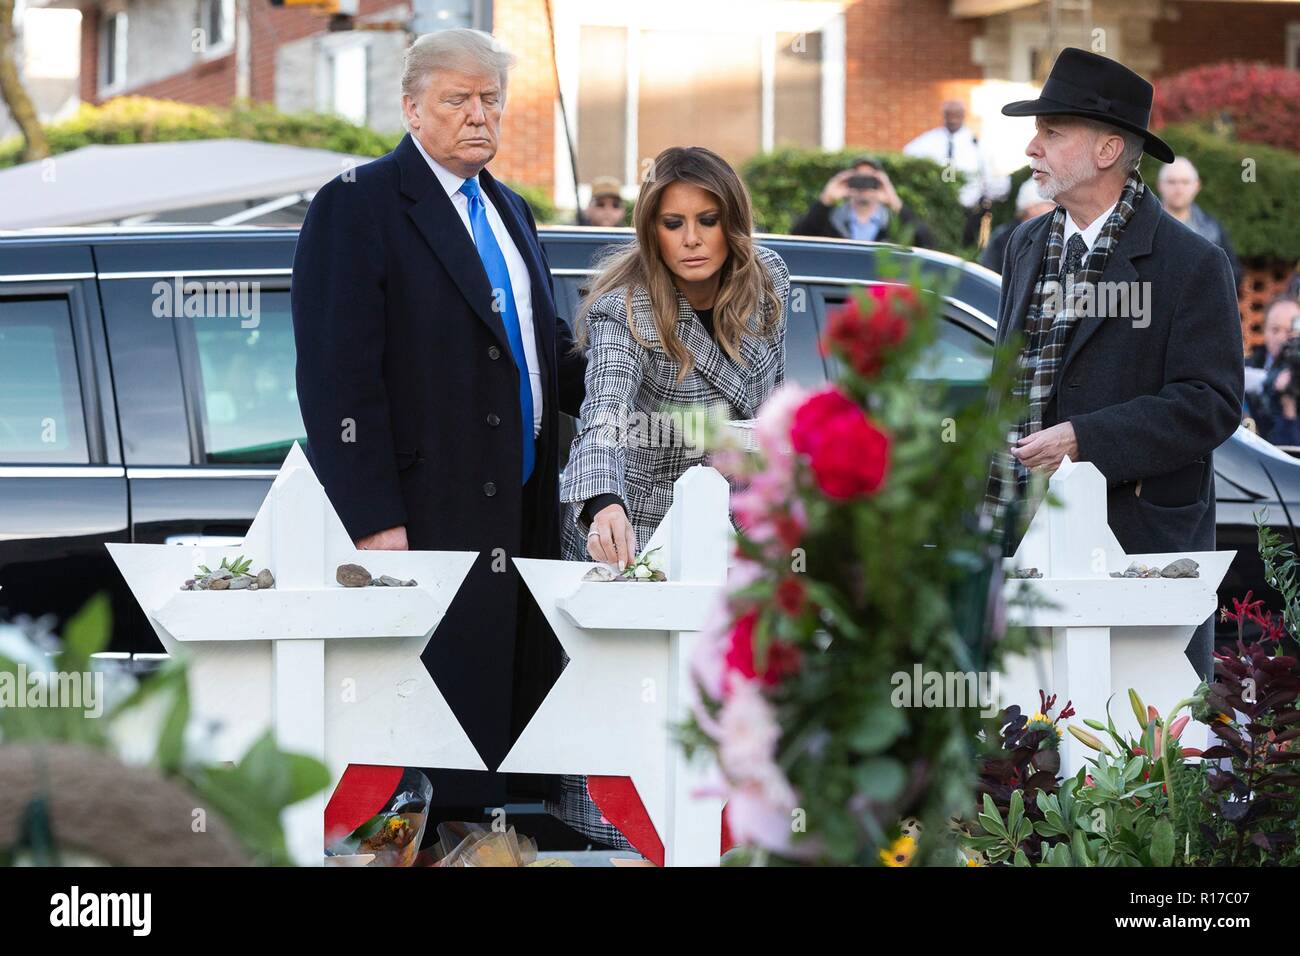 U.S first lady Melania Trump, place a tiny white rose on the memorial of those killed at the Tree of Life Synagogue as President Donald Trump and Rabbi Jeffrey Myers, right, look on October 30, 2018 in Pittsburgh, Pennsylvania. Stock Photo